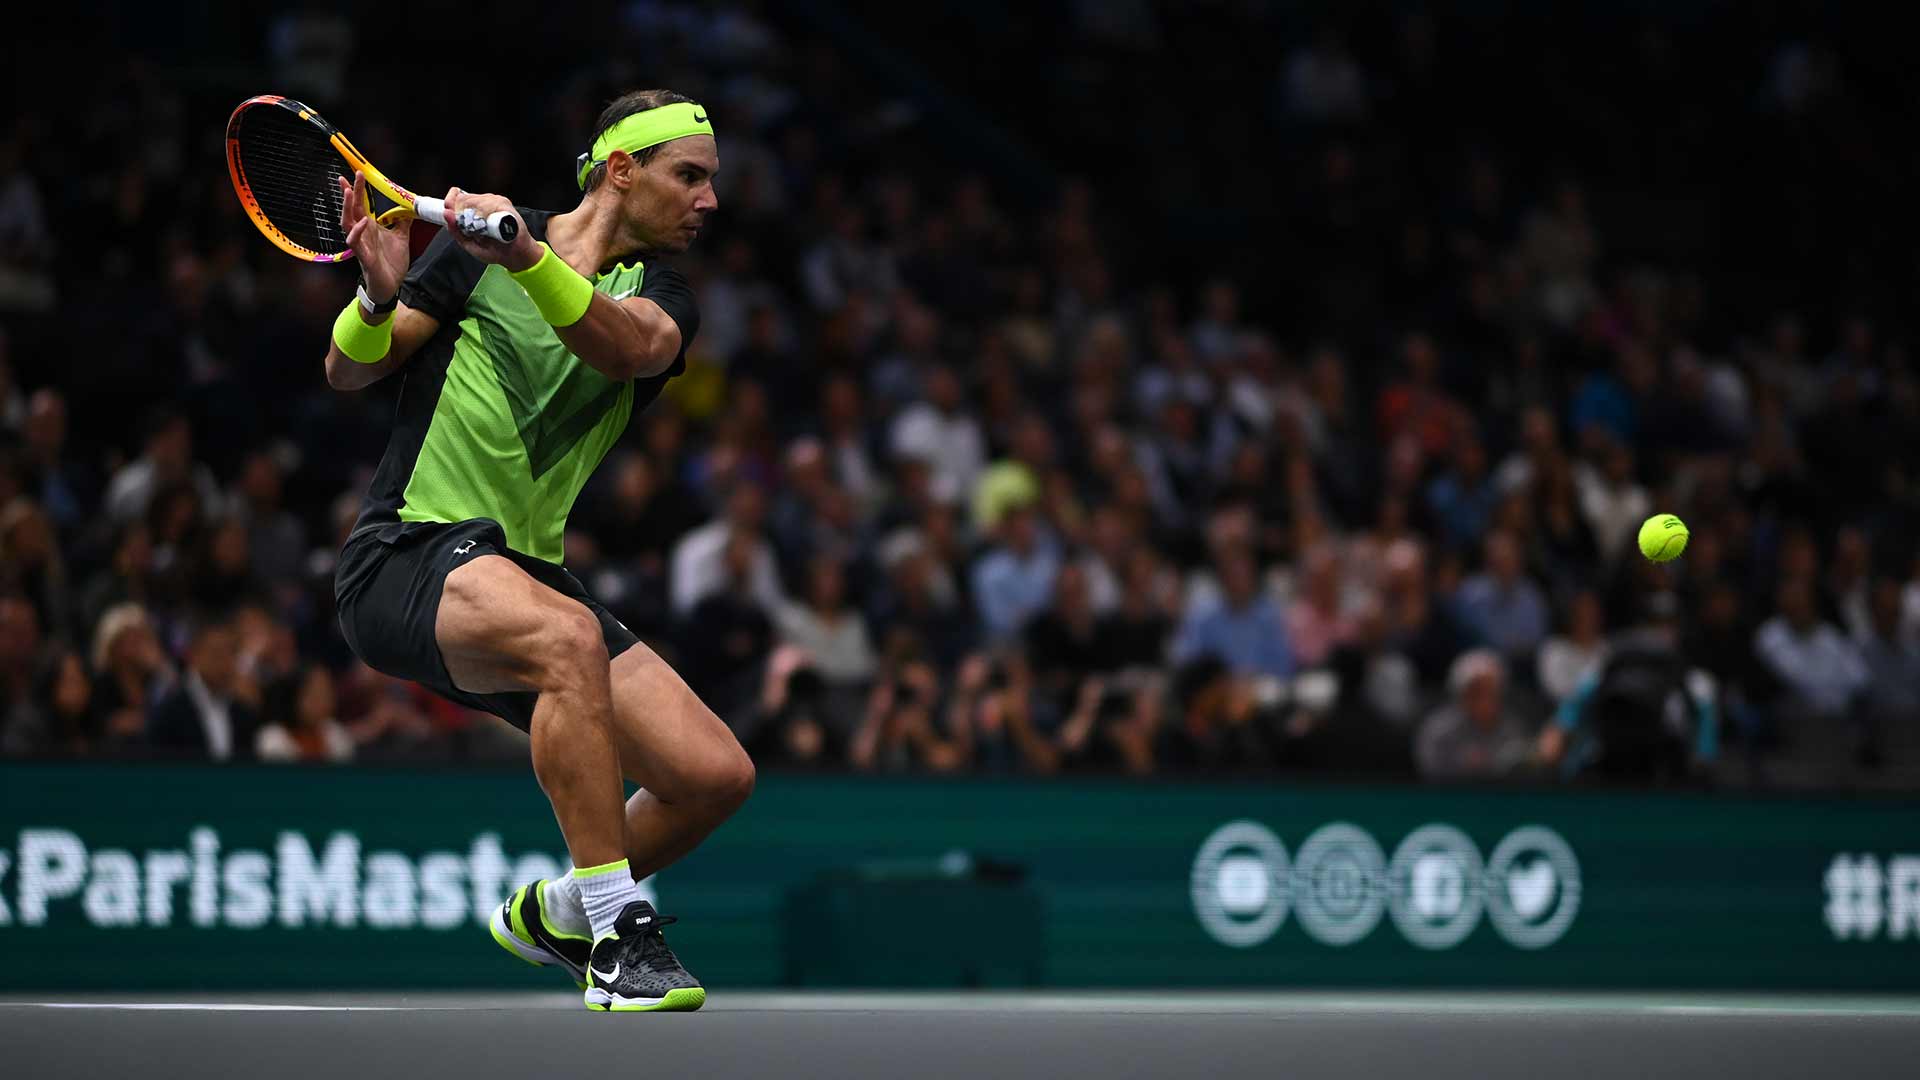 Rafael Nadal falls to Tommy Paul in Paris, his first match since the US Open.